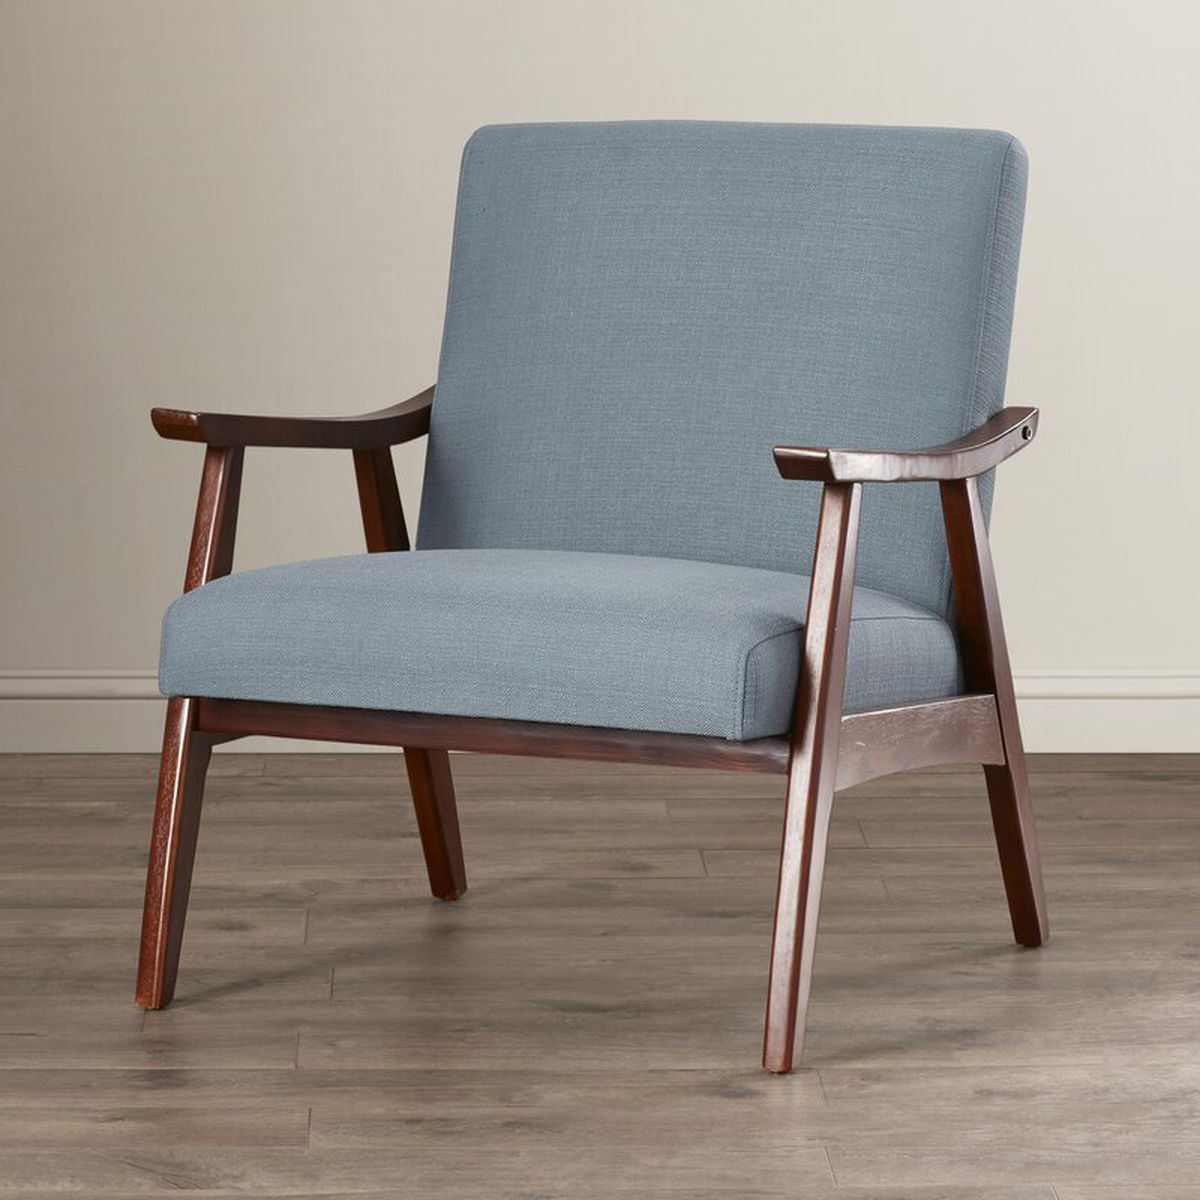 Lounge chair with wooden legs and blue upholstery.